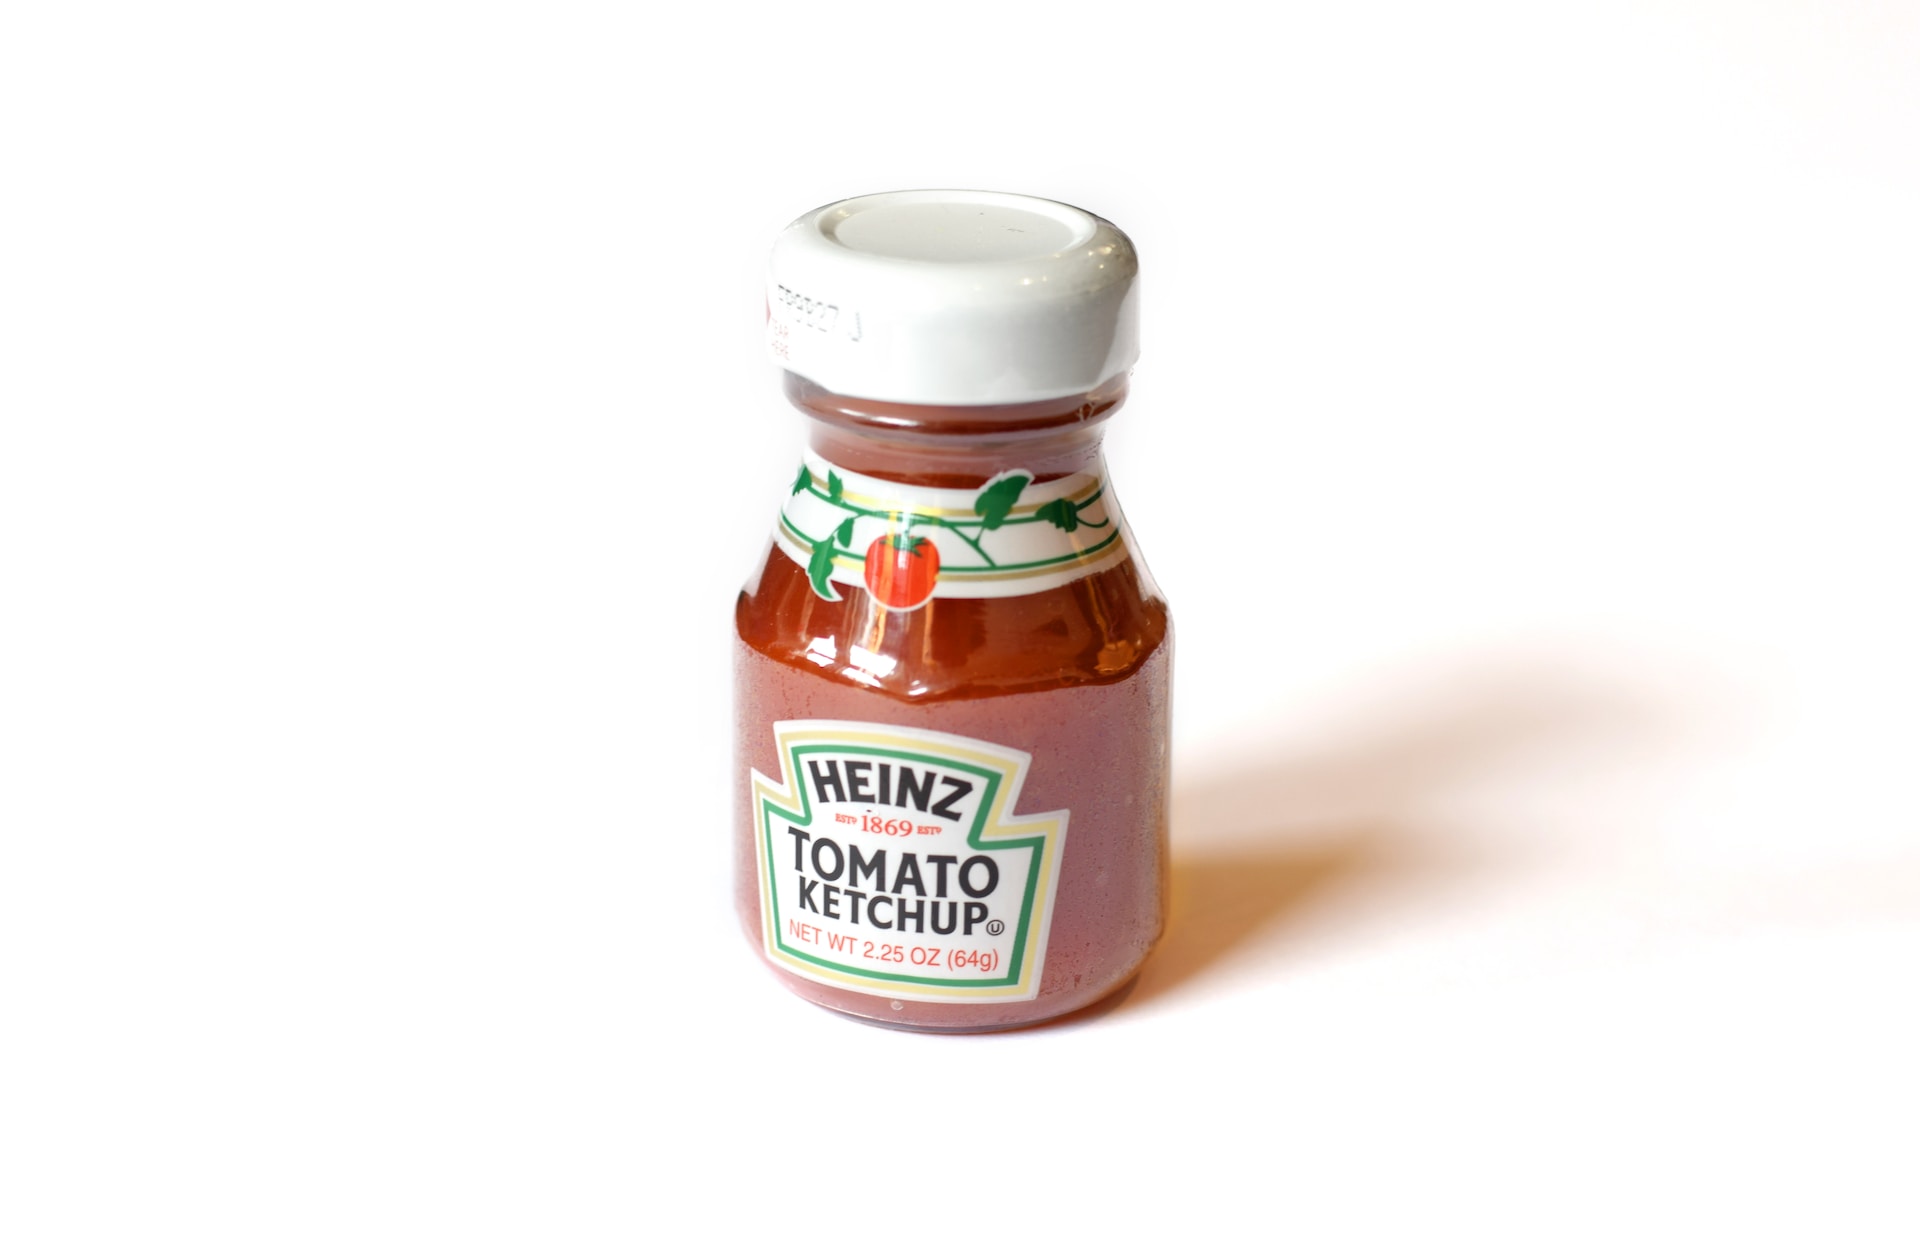 A small bottle of Heinz ketchup on a white background